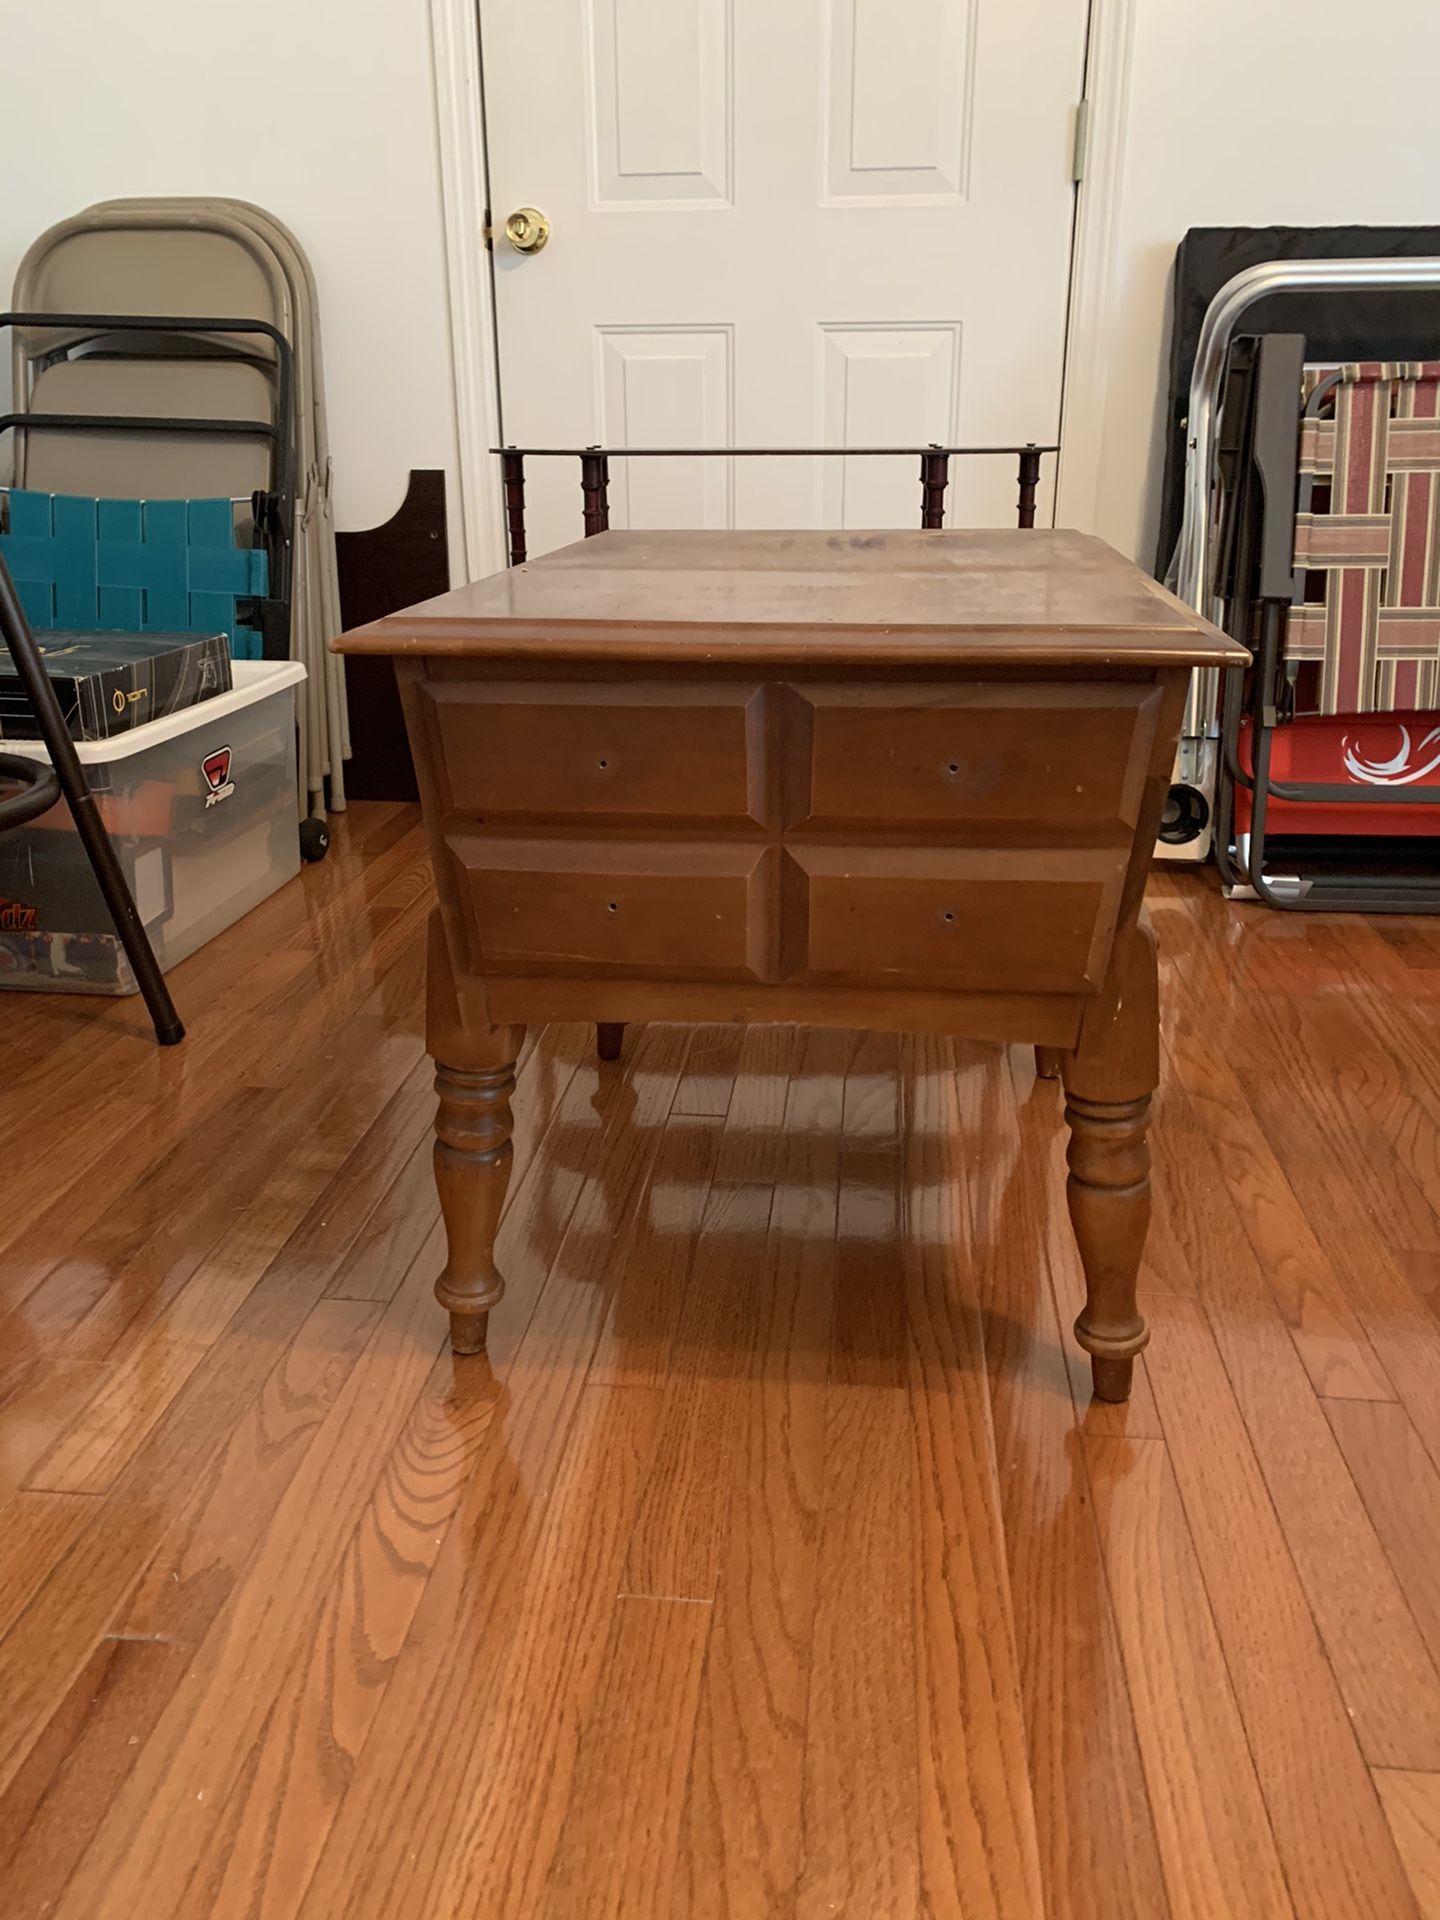 Nice end table good condition